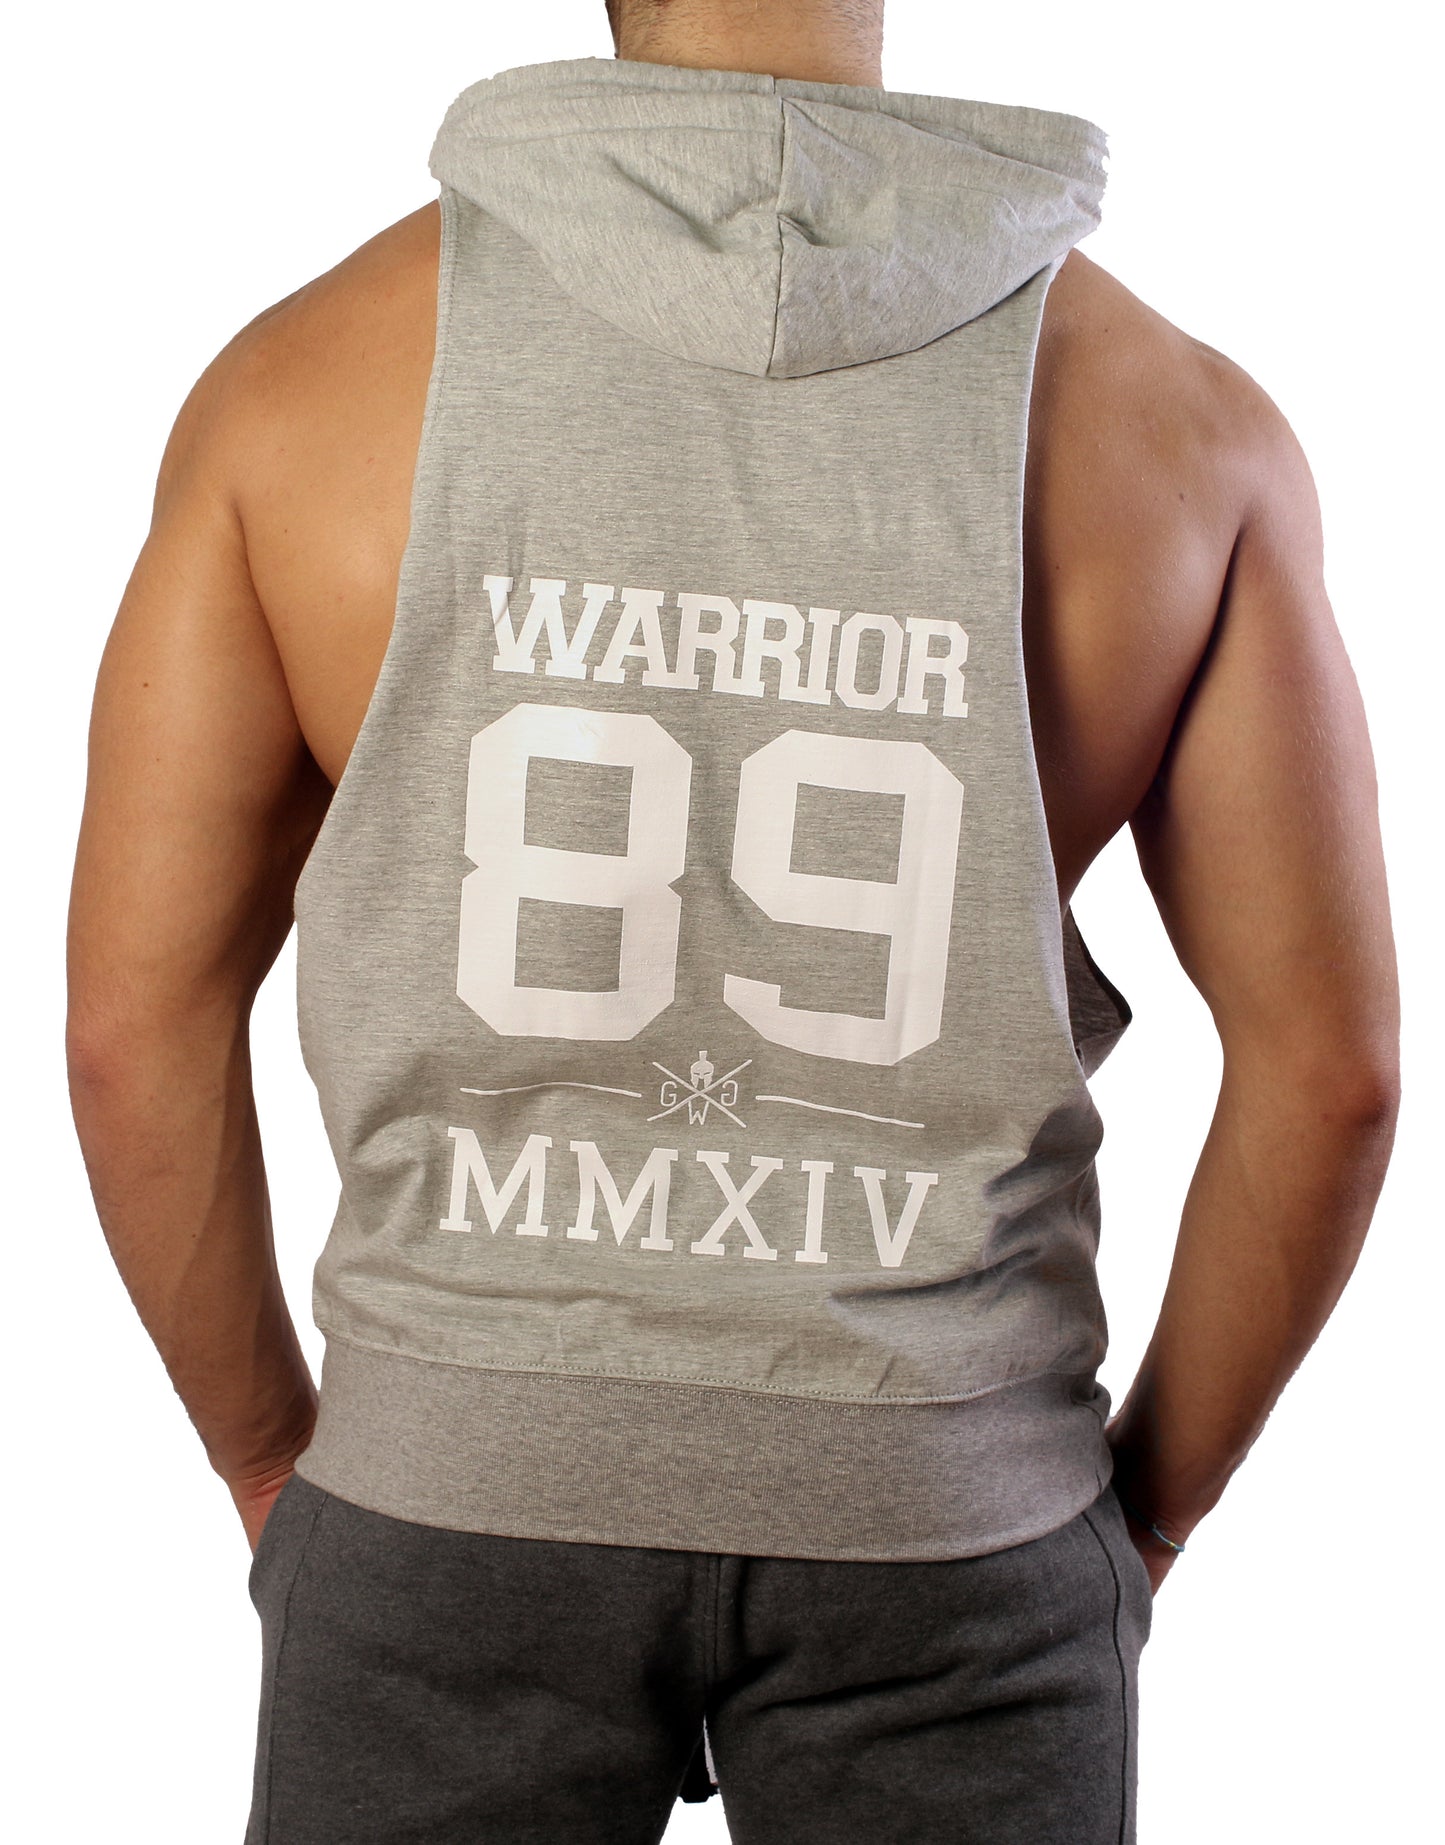 Fighter tank top - gray